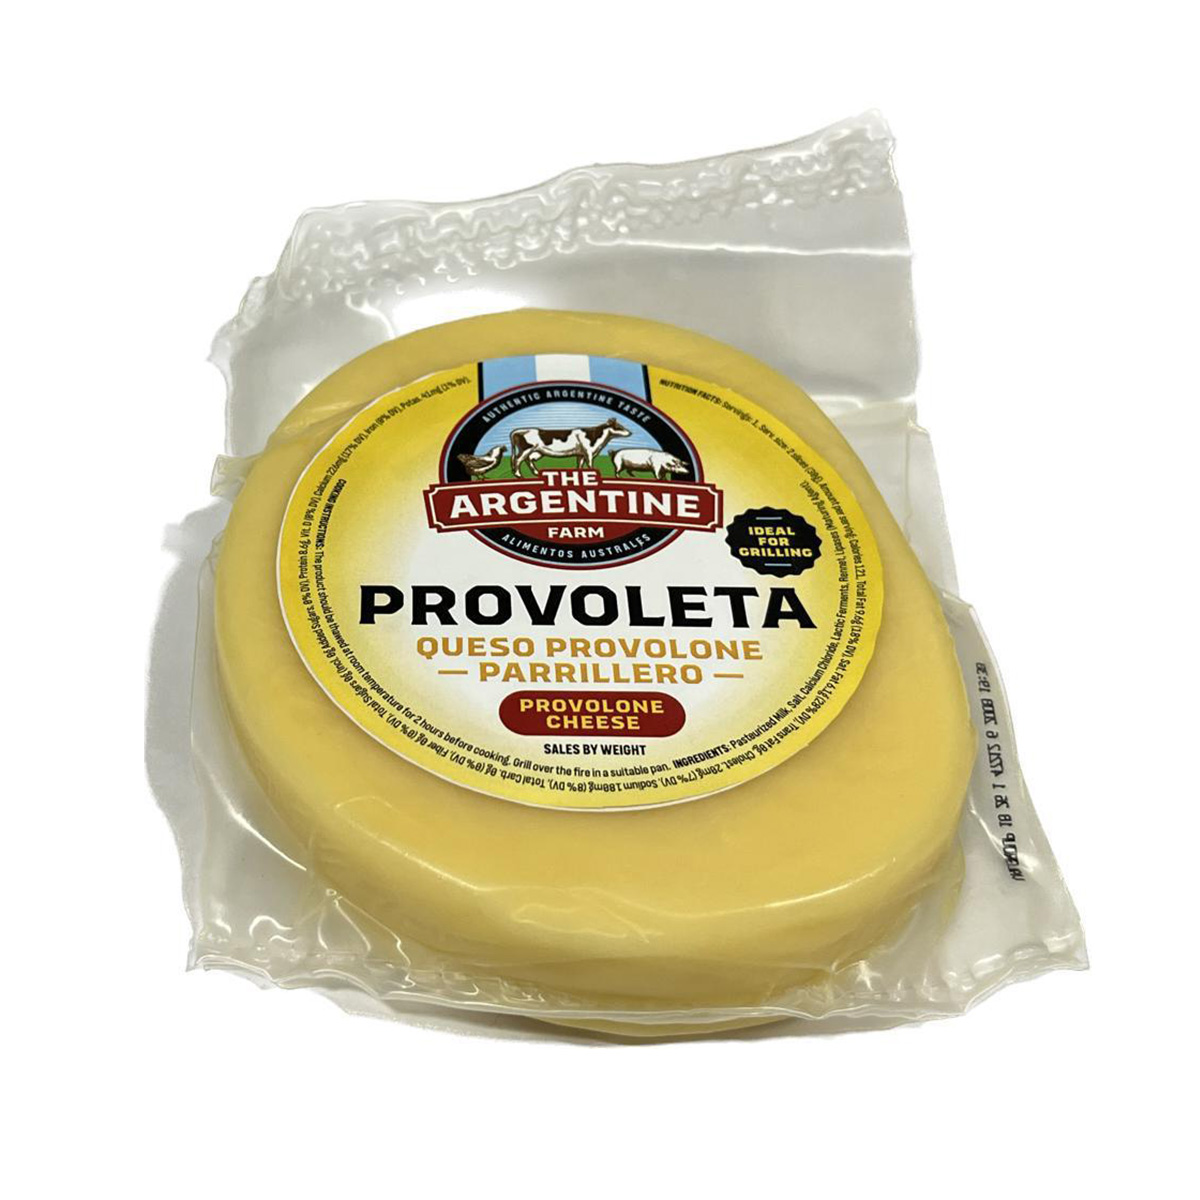 Barbecue Provolone 8.11 42 Alimentos | Farm The Cheese x oz. Australes Argentine